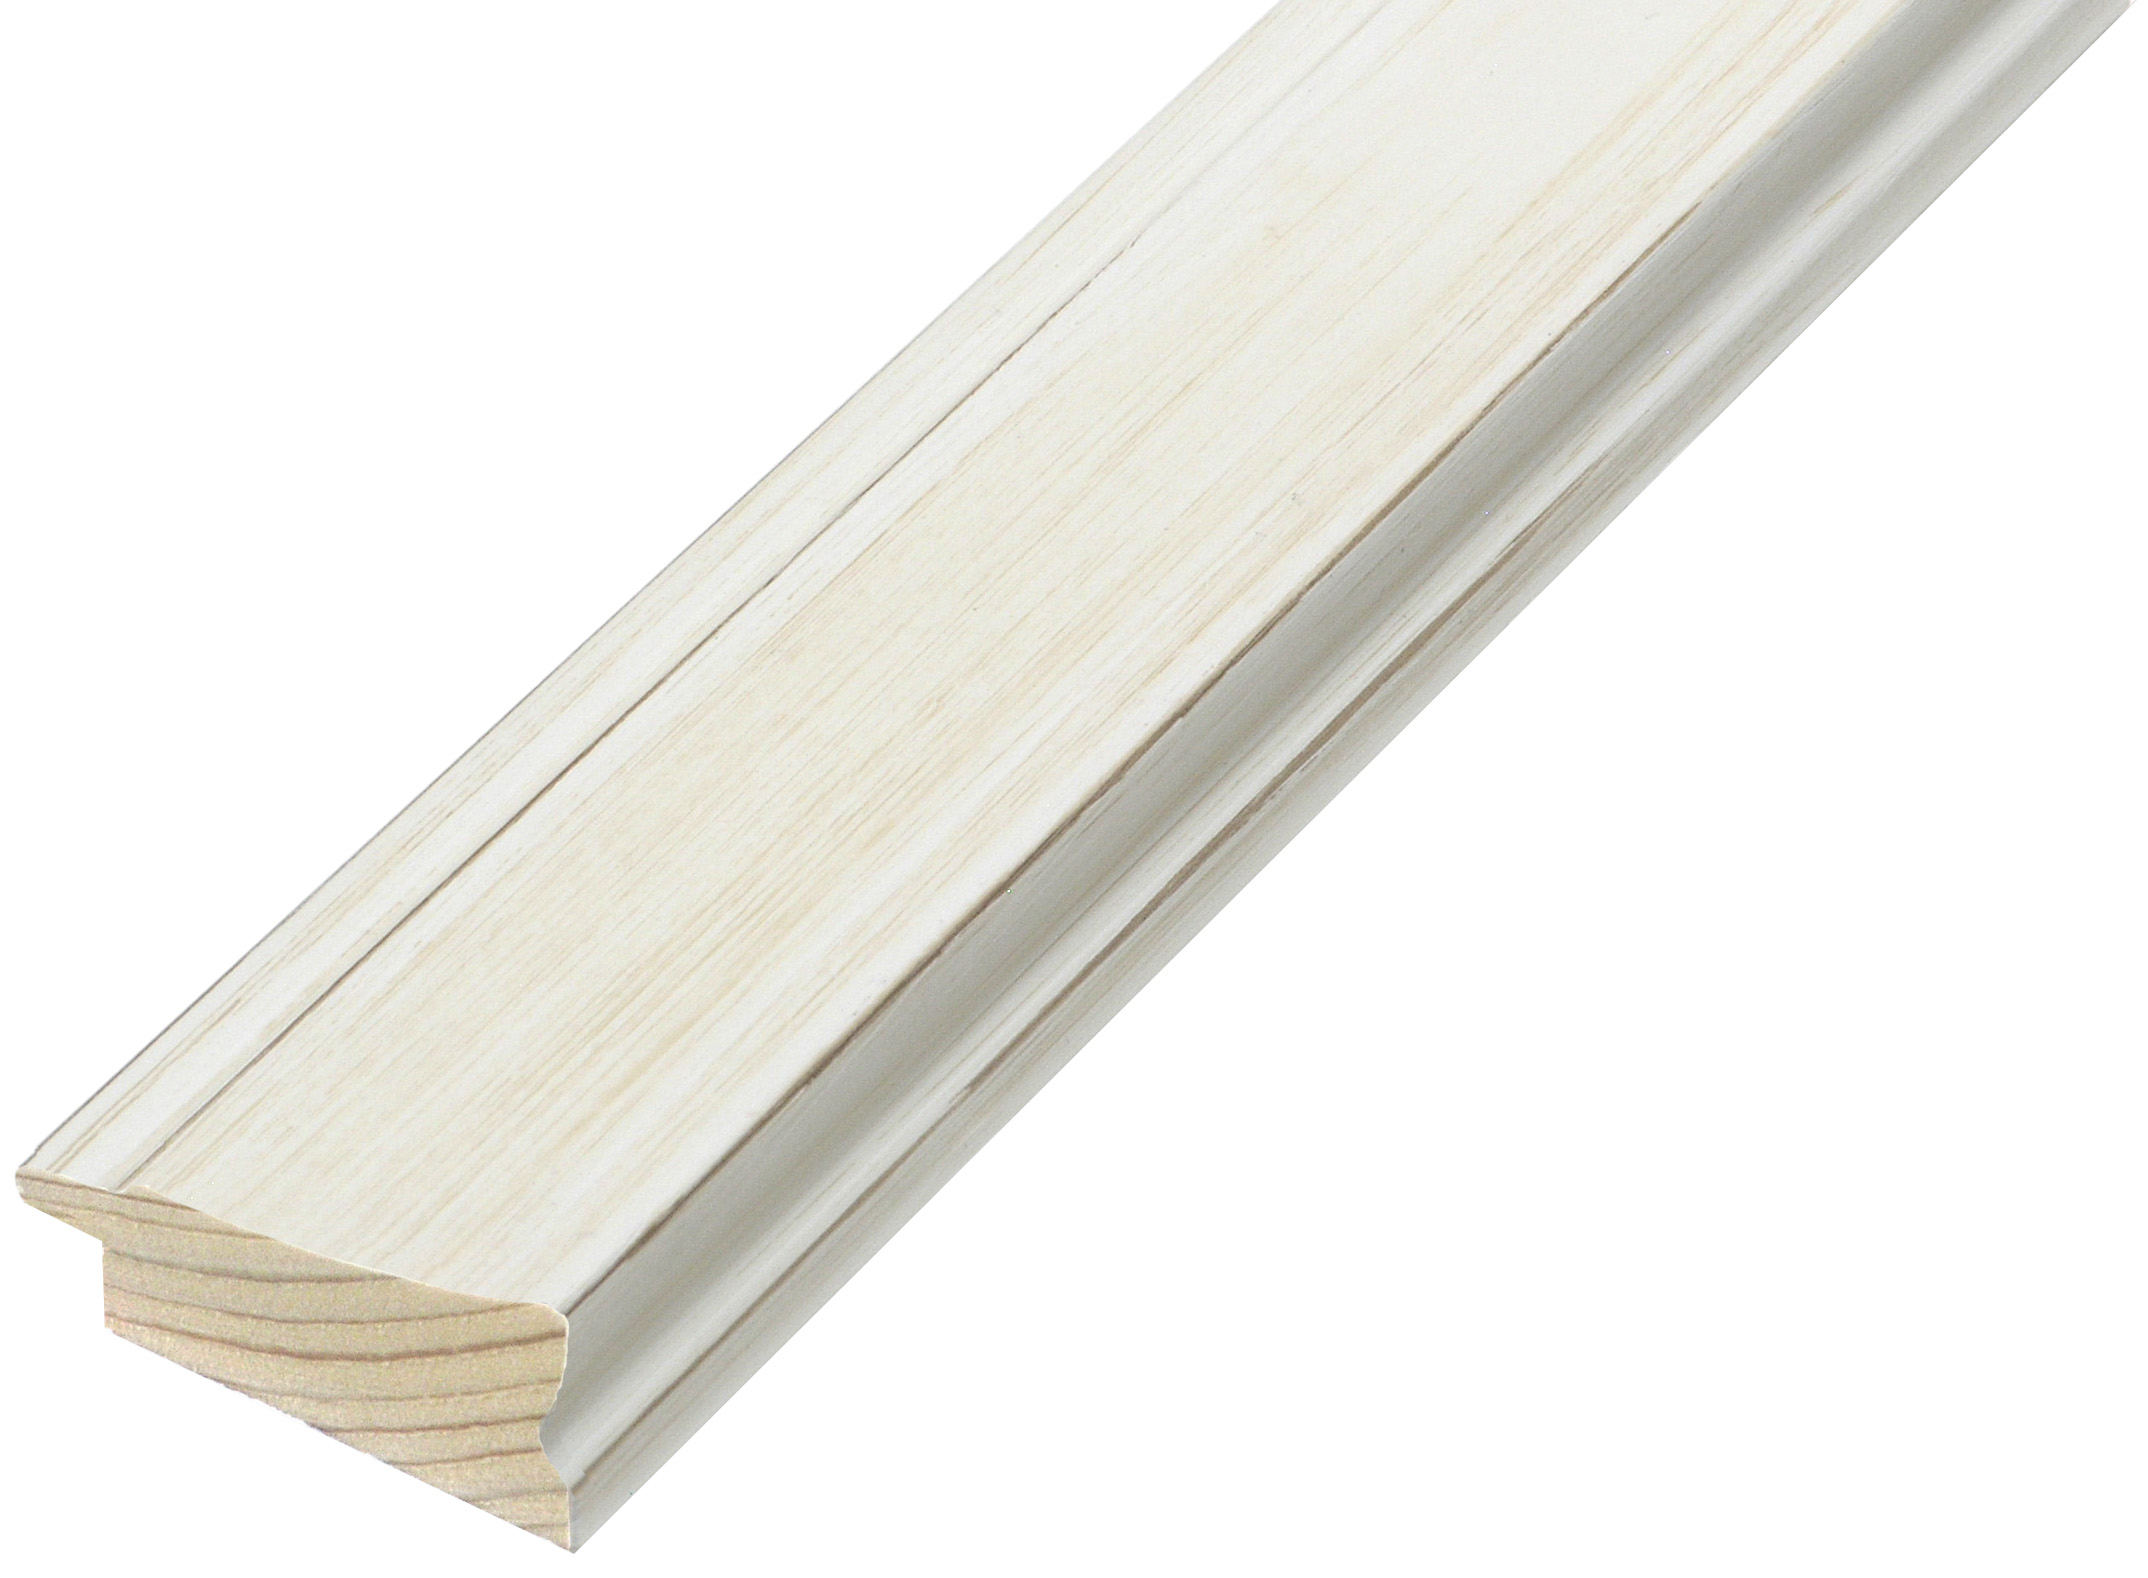 Moulding finger-jointed pine - Width 43mm - Cream finish